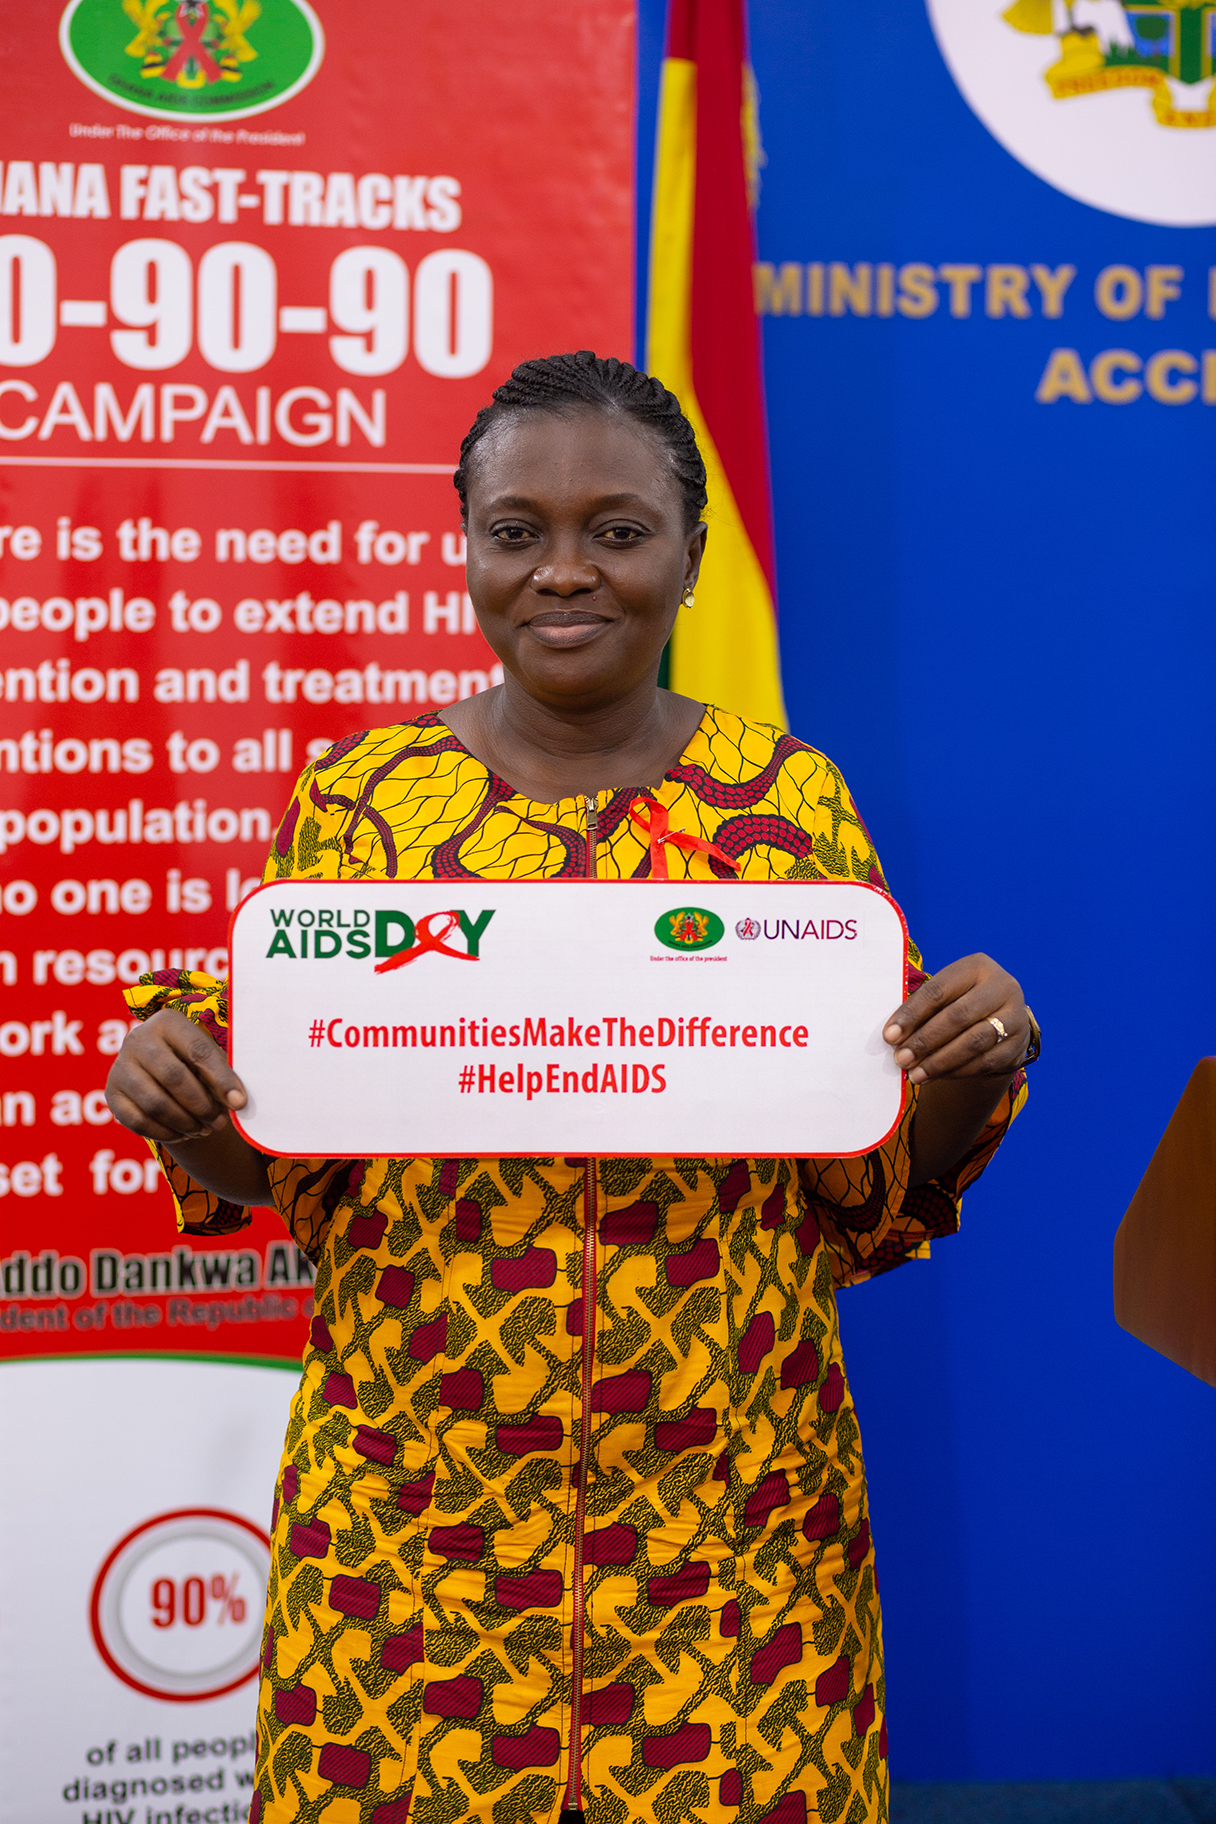 World AIDS Day 2019 HashTag Campaign